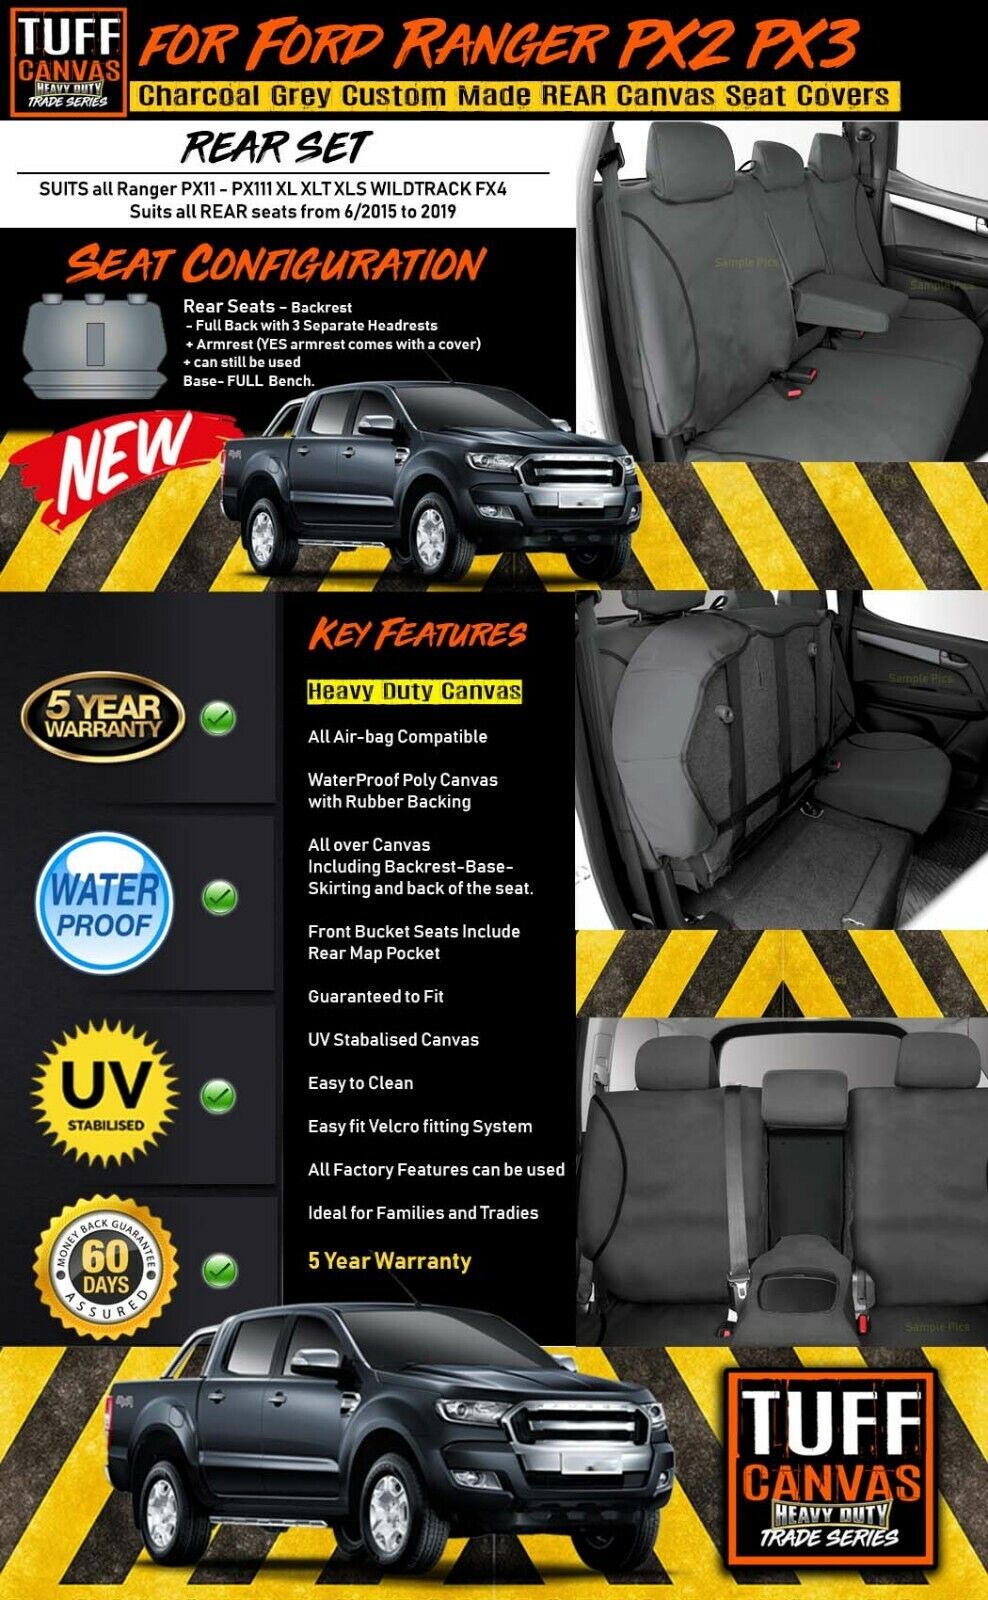 TUFF HD TRADE Canvas Seat Covers Rear For Ford Ranger PX2 PX3 XLT XL 6/2015-2019 Charcoal